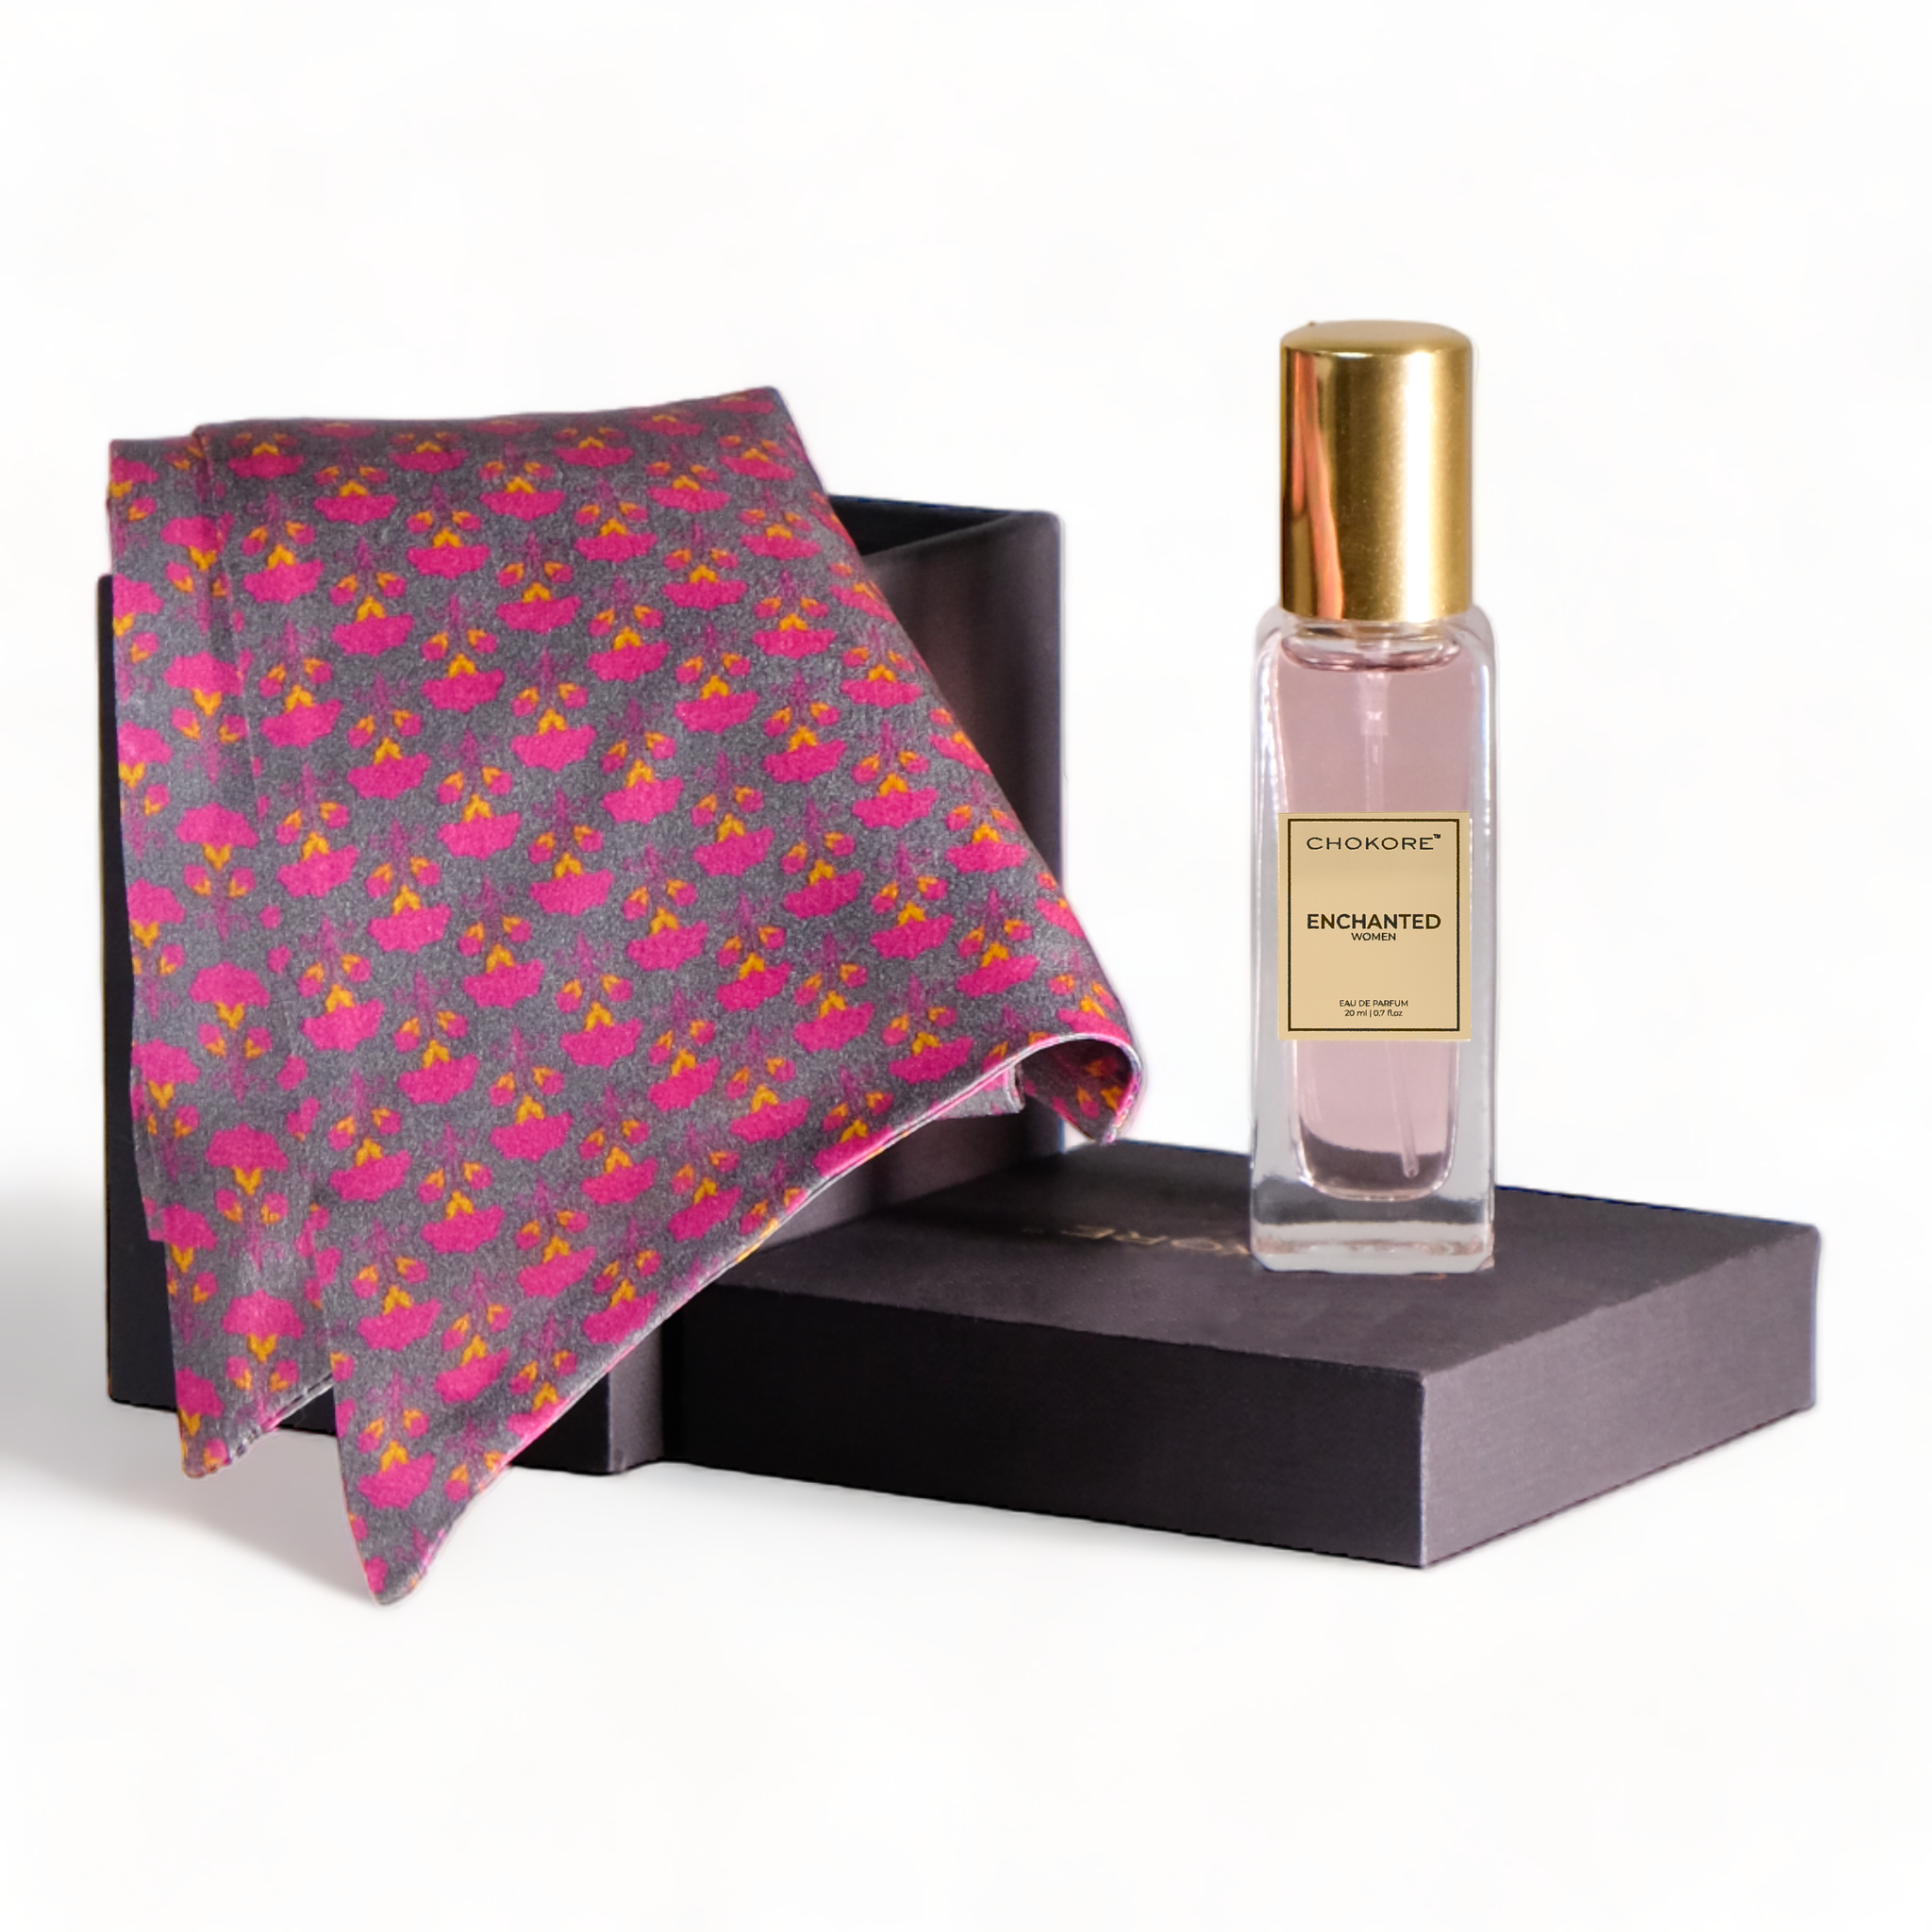 Chokore Special 2-in-1 Gift Set for Her(Pink and Purple Silk Scarf & 20 ml Enchanted Perfume)Her (Printed Stole & 20 ml Scandalous Perfume)